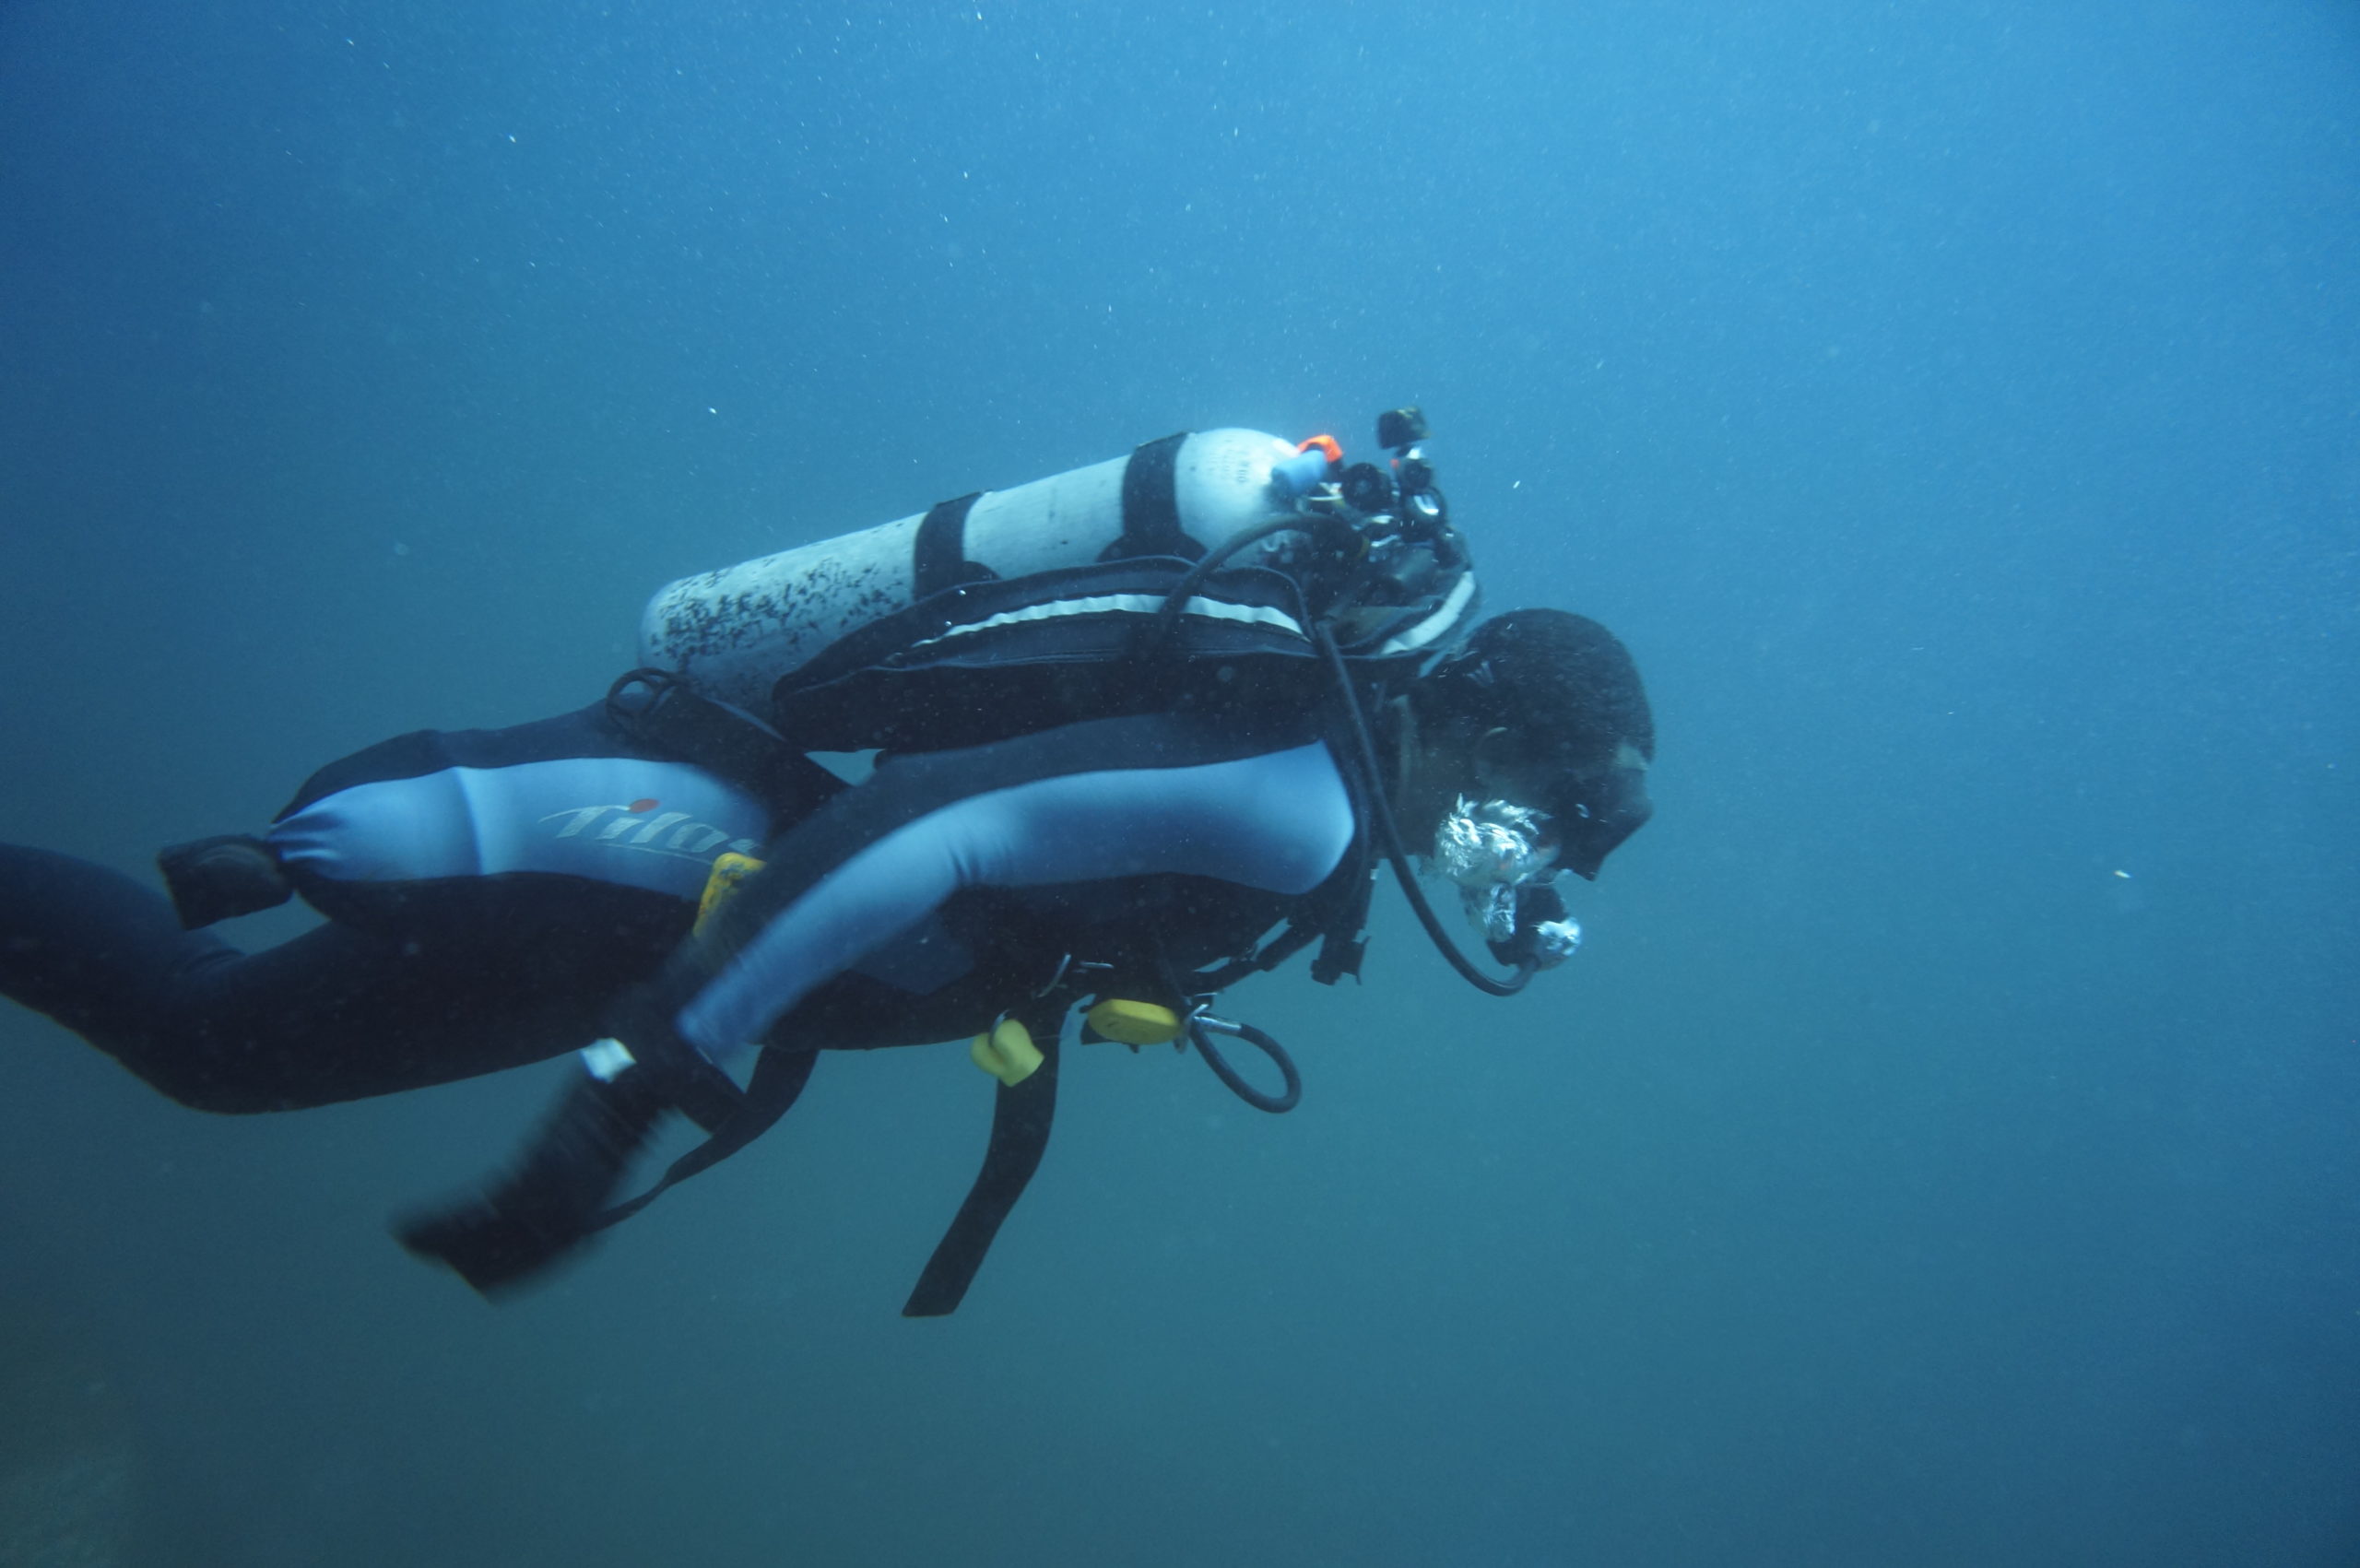 Athlete with right leg amputation scuba diving